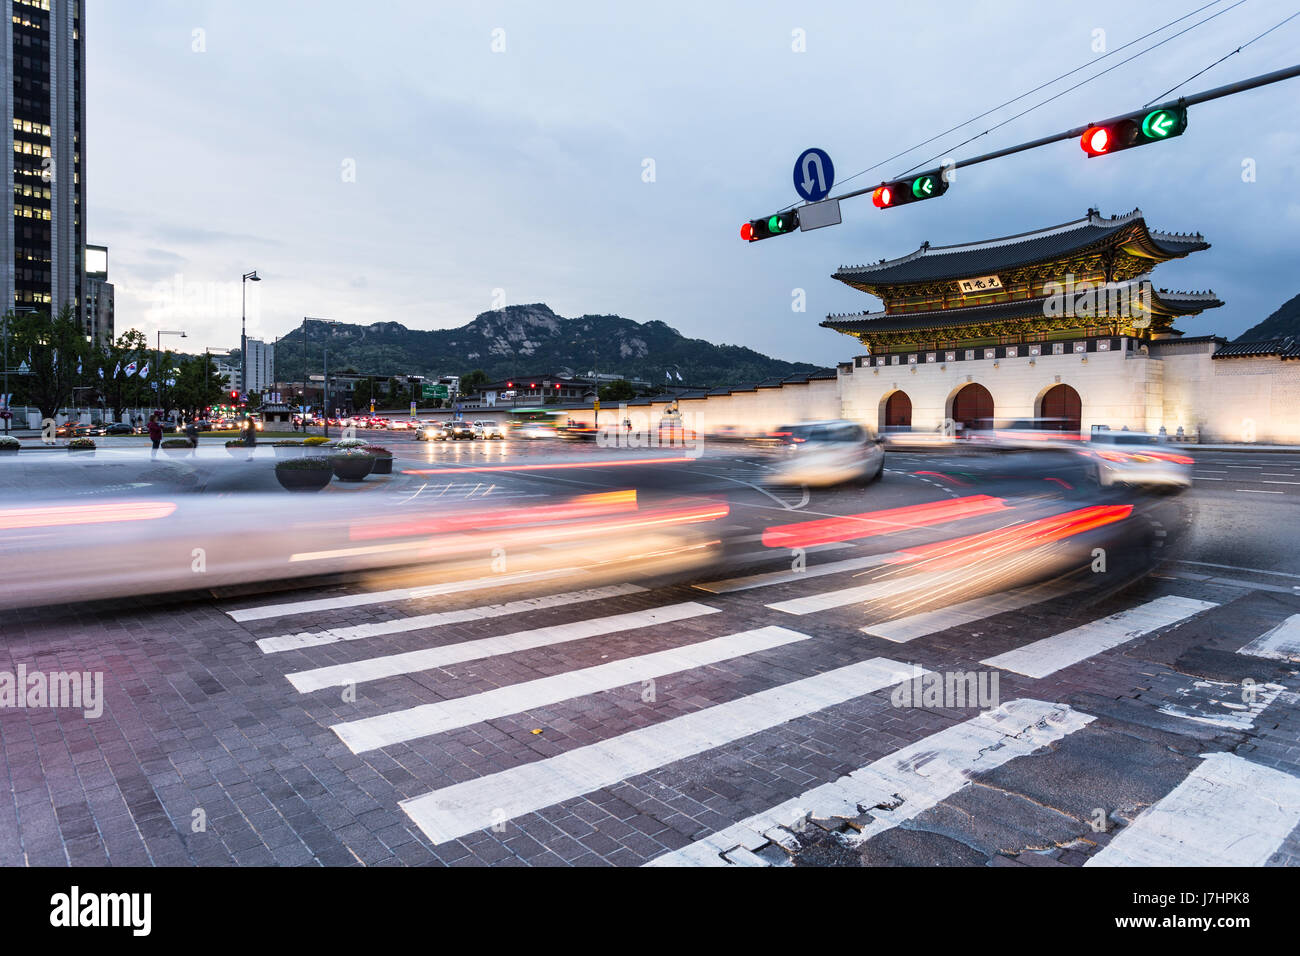 Traffic rushing at night in front of the Gwanghawmun gate in front of the Gyeongbokgung palace in the heart of historic Seoul, South Korea capital cit Stock Photo